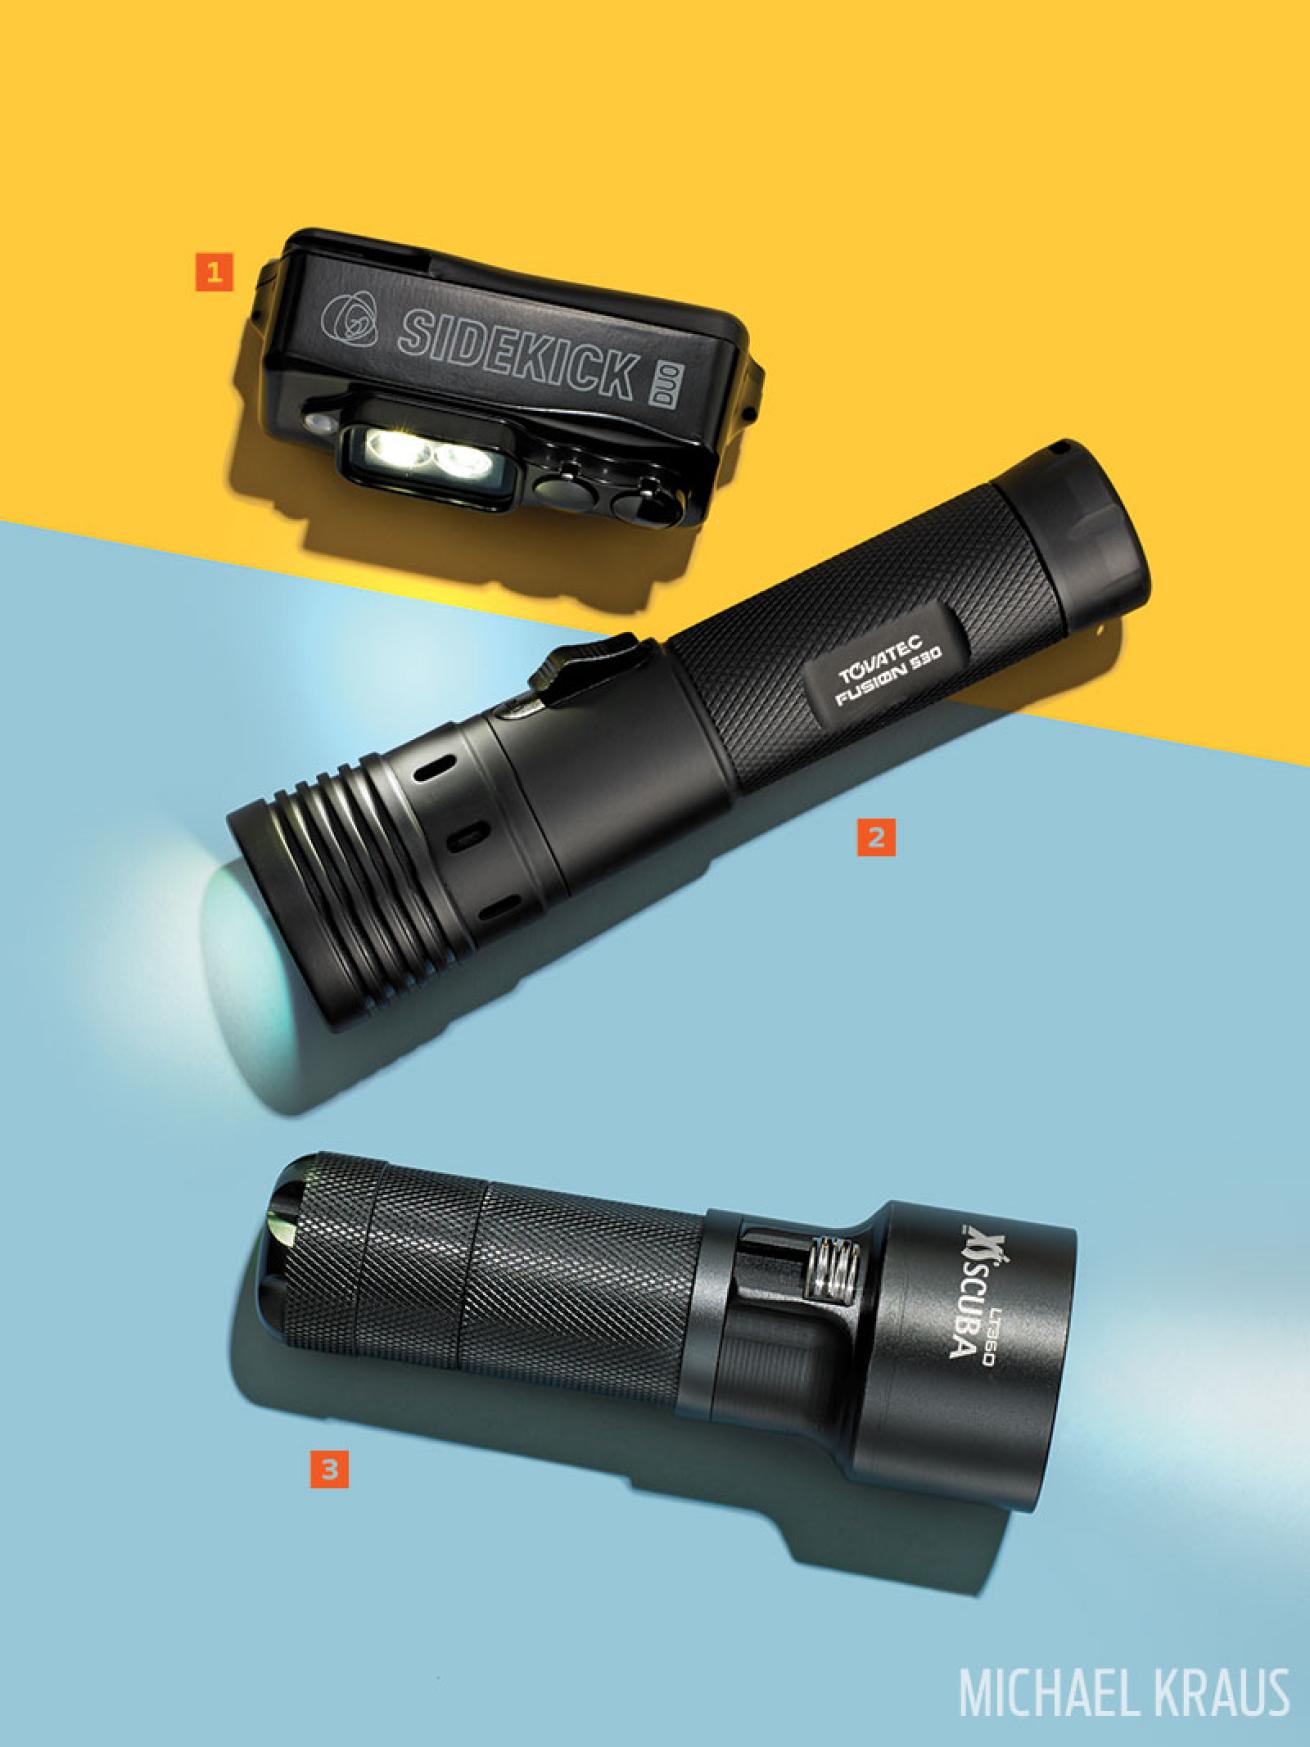 Best dive lights 2016 — Light and Motion, Tovatec and XS Scuba